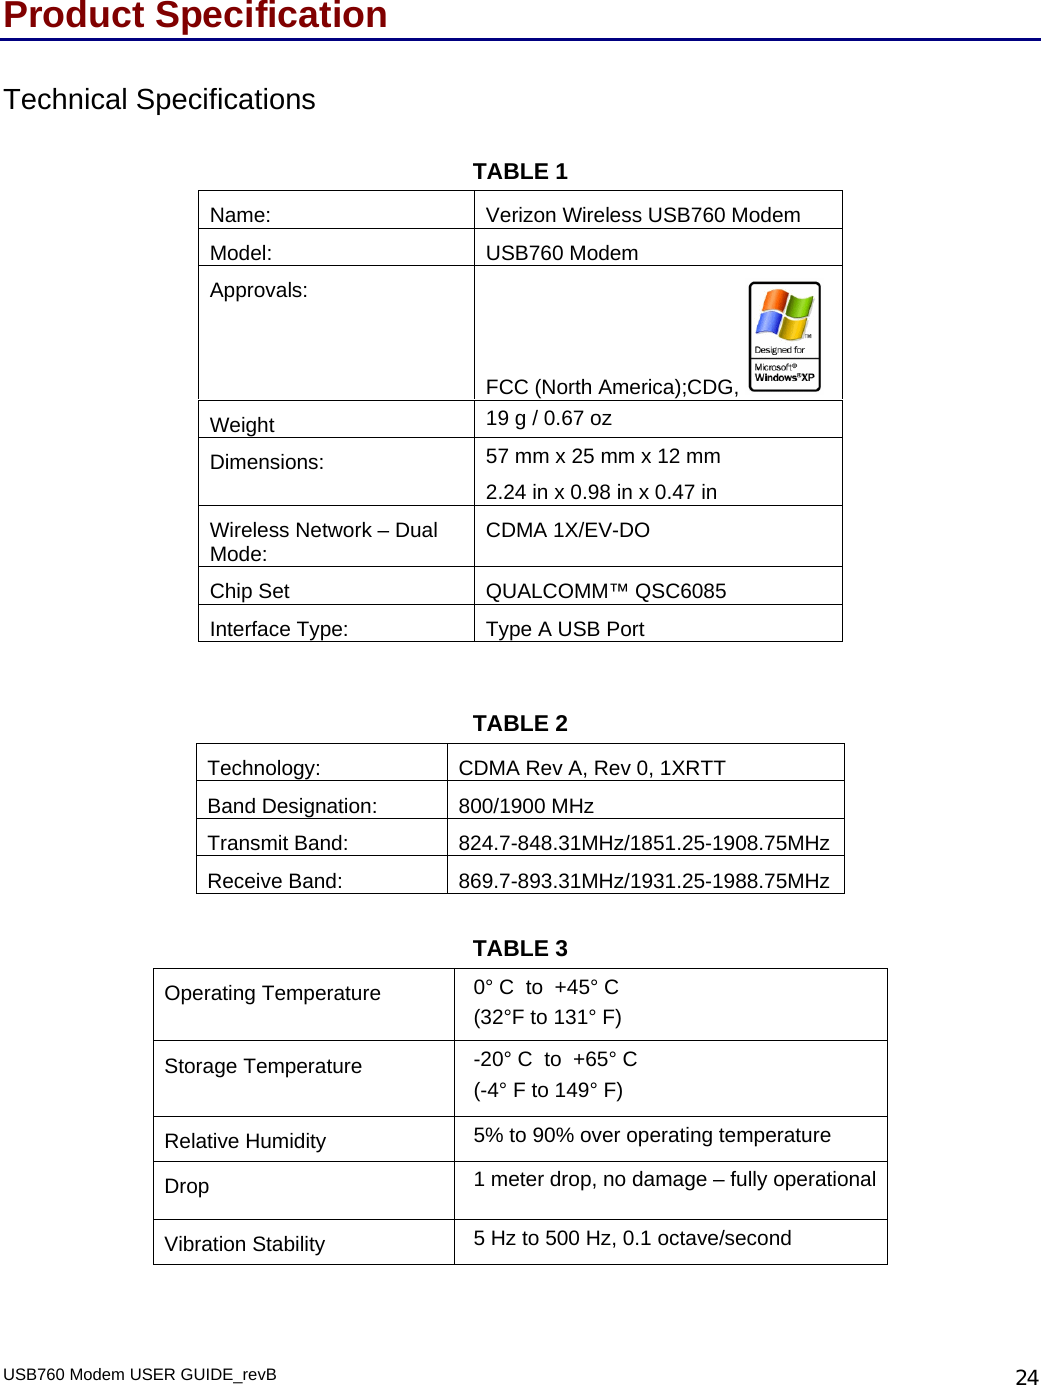 Product Specification Technical Specifications TABLE 1   Name:  Verizon Wireless USB760 Modem Model: USB760 Modem Approvals: FCC (North America);CDG,   19 g / 0.67 oz Weight Dimensions:  57 mm x 25 mm x 12 mm 2.24 in x 0.98 in x 0.47 in Wireless Network – Dual Mode:  CDMA 1X/EV-DO Chip Set  QUALCOMM™ QSC6085 Interface Type:  Type A USB Port TABLE 2 Technology:  CDMA Rev A, Rev 0, 1XRTT Band Designation:  800/1900 MHz Transmit Band:  824.7-848.31MHz/1851.25-1908.75MHz Receive Band:  869.7-893.31MHz/1931.25-1988.75MHz TABLE 3 Operating Temperature  0° C  to  +45° C  (32°F to 131° F) Storage Temperature  -20° C  to  +65° C (-4° F to 149° F) 5% to 90% over operating temperature Relative Humidity 1 meter drop, no damage – fully operational Drop 5 Hz to 500 Hz, 0.1 octave/second Vibration Stability USB760 Modem USER GUIDE_revB   24